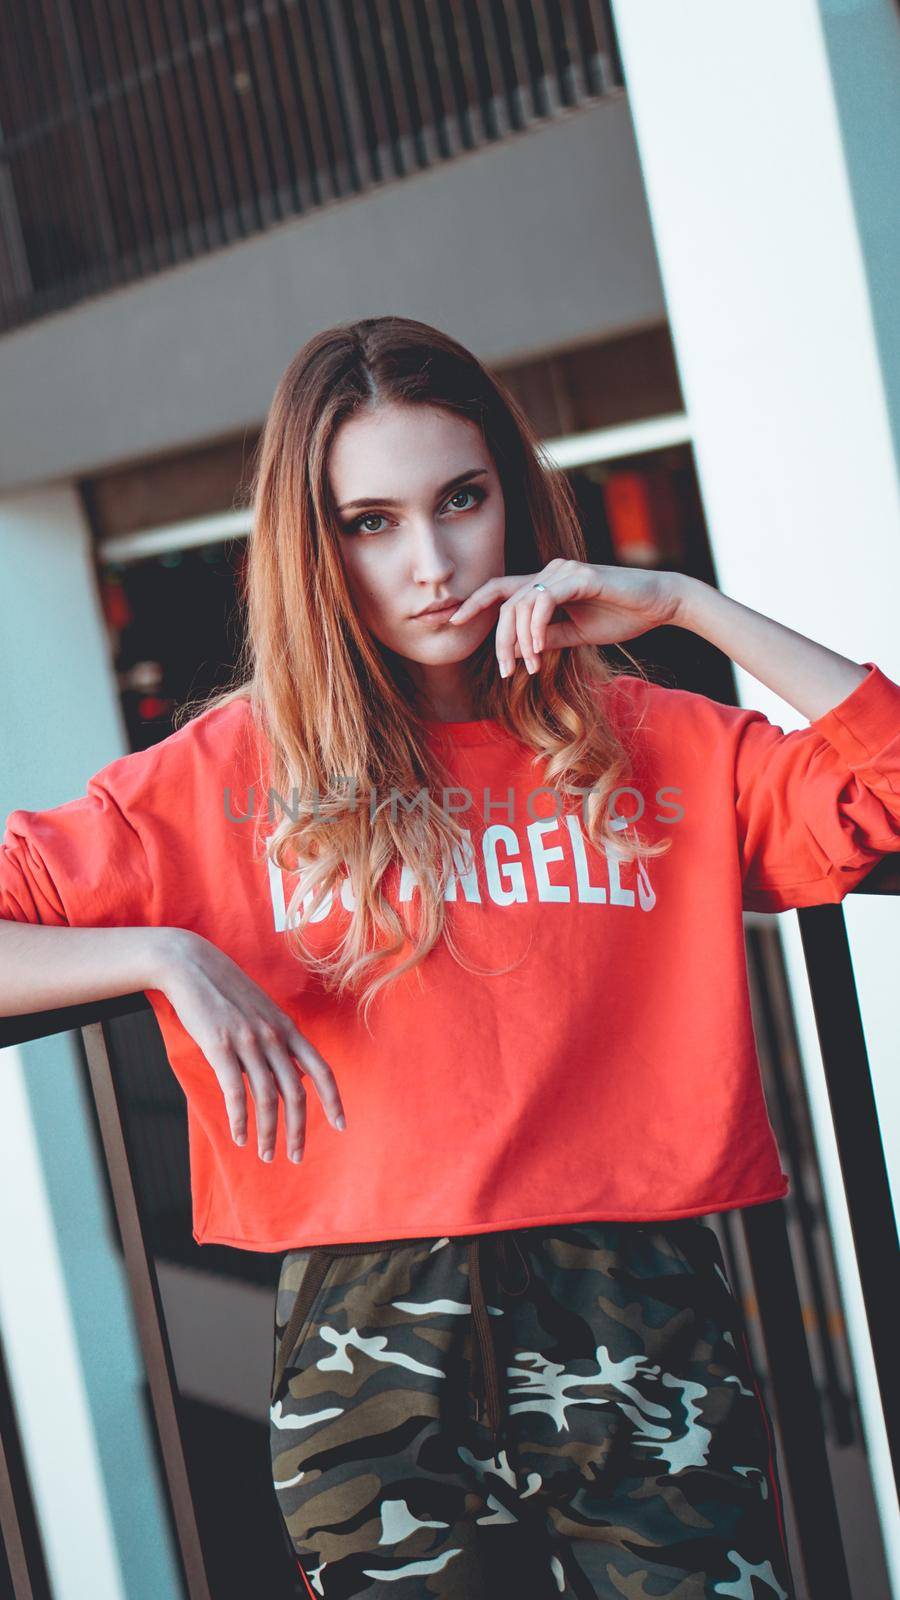 Fashion model wearing red hoodie with the inscription los angeles posing in the city at parking. Fashion urban outfit. Casual everyday clothing style